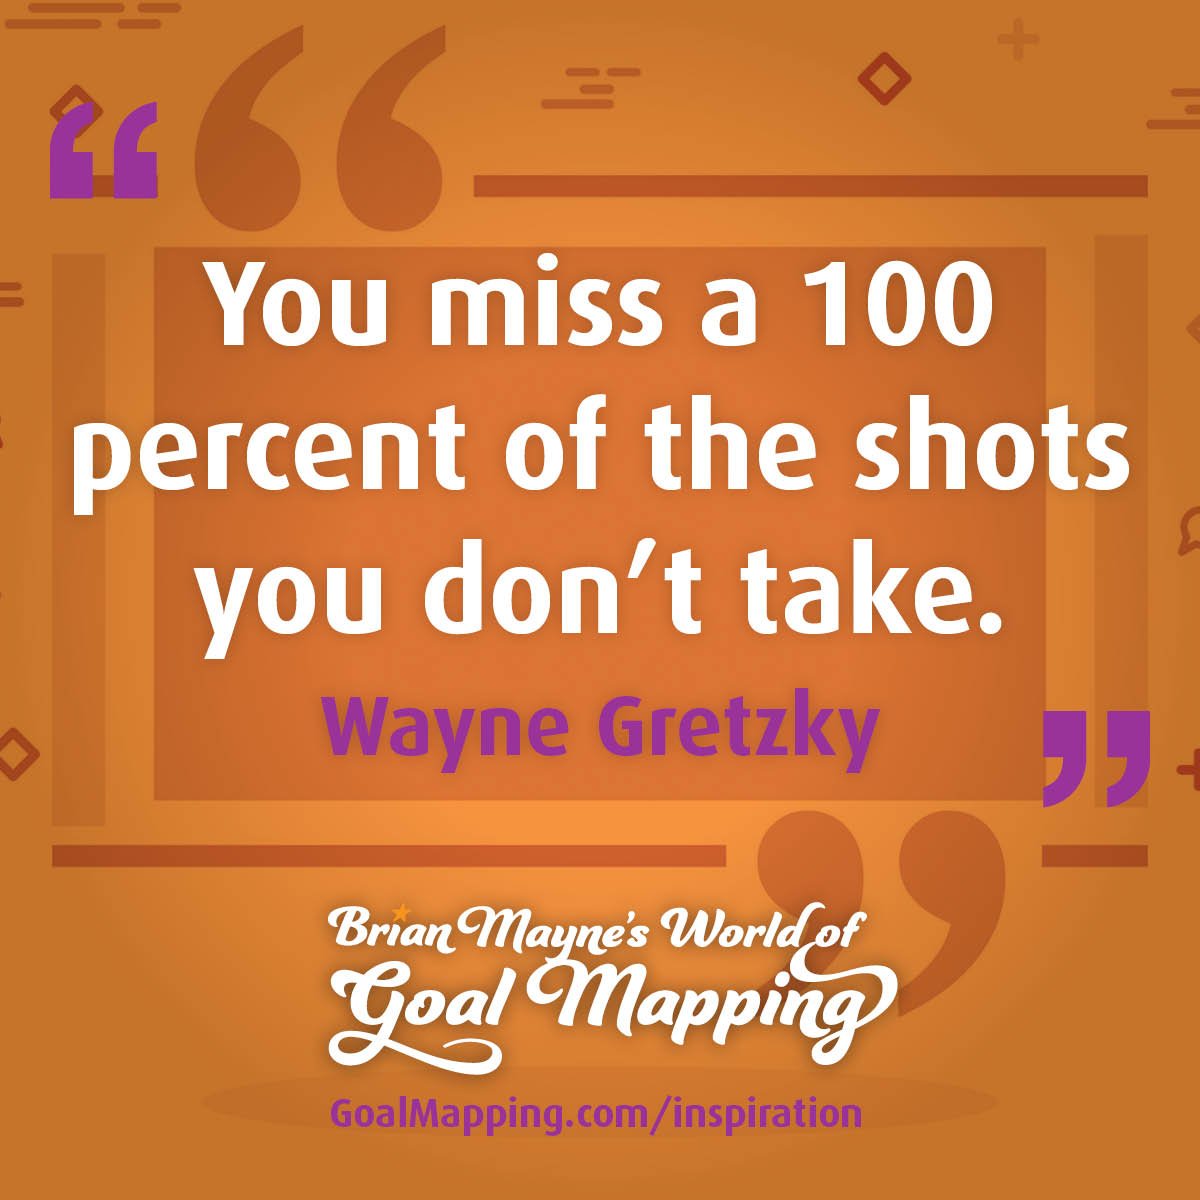 "You miss a 100 percent of the shots you don’t take." Wayne Gretzky